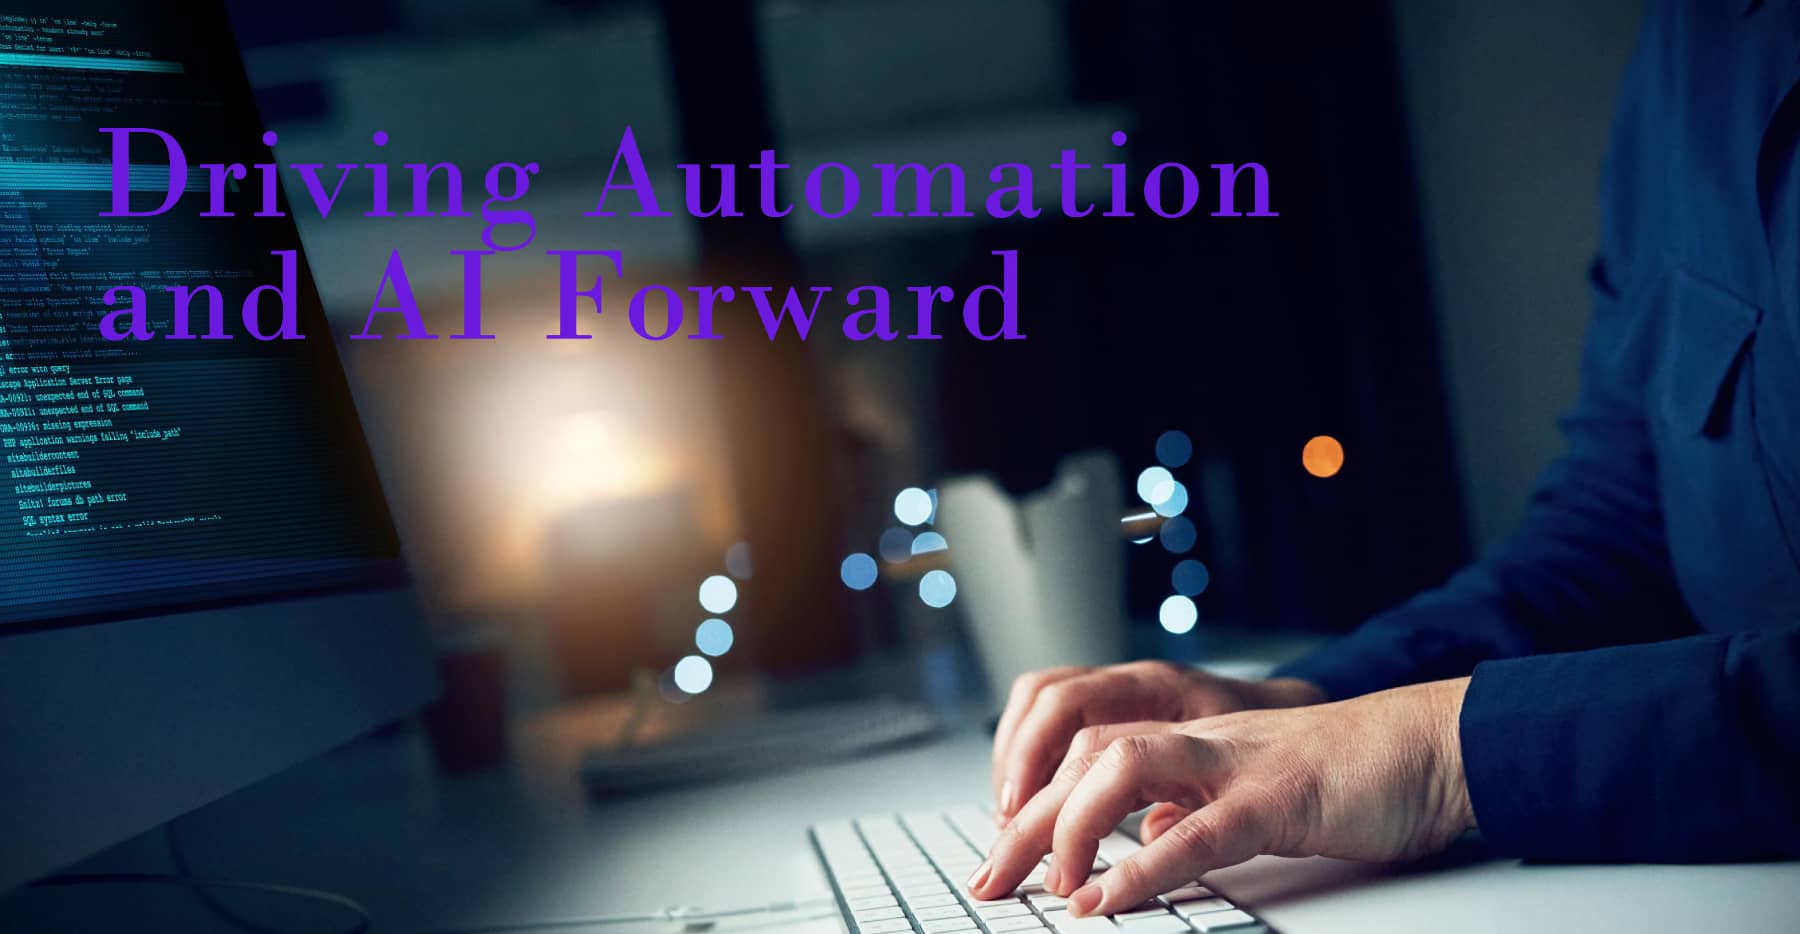 Steering Automation and AI Towards a Brighter Futu